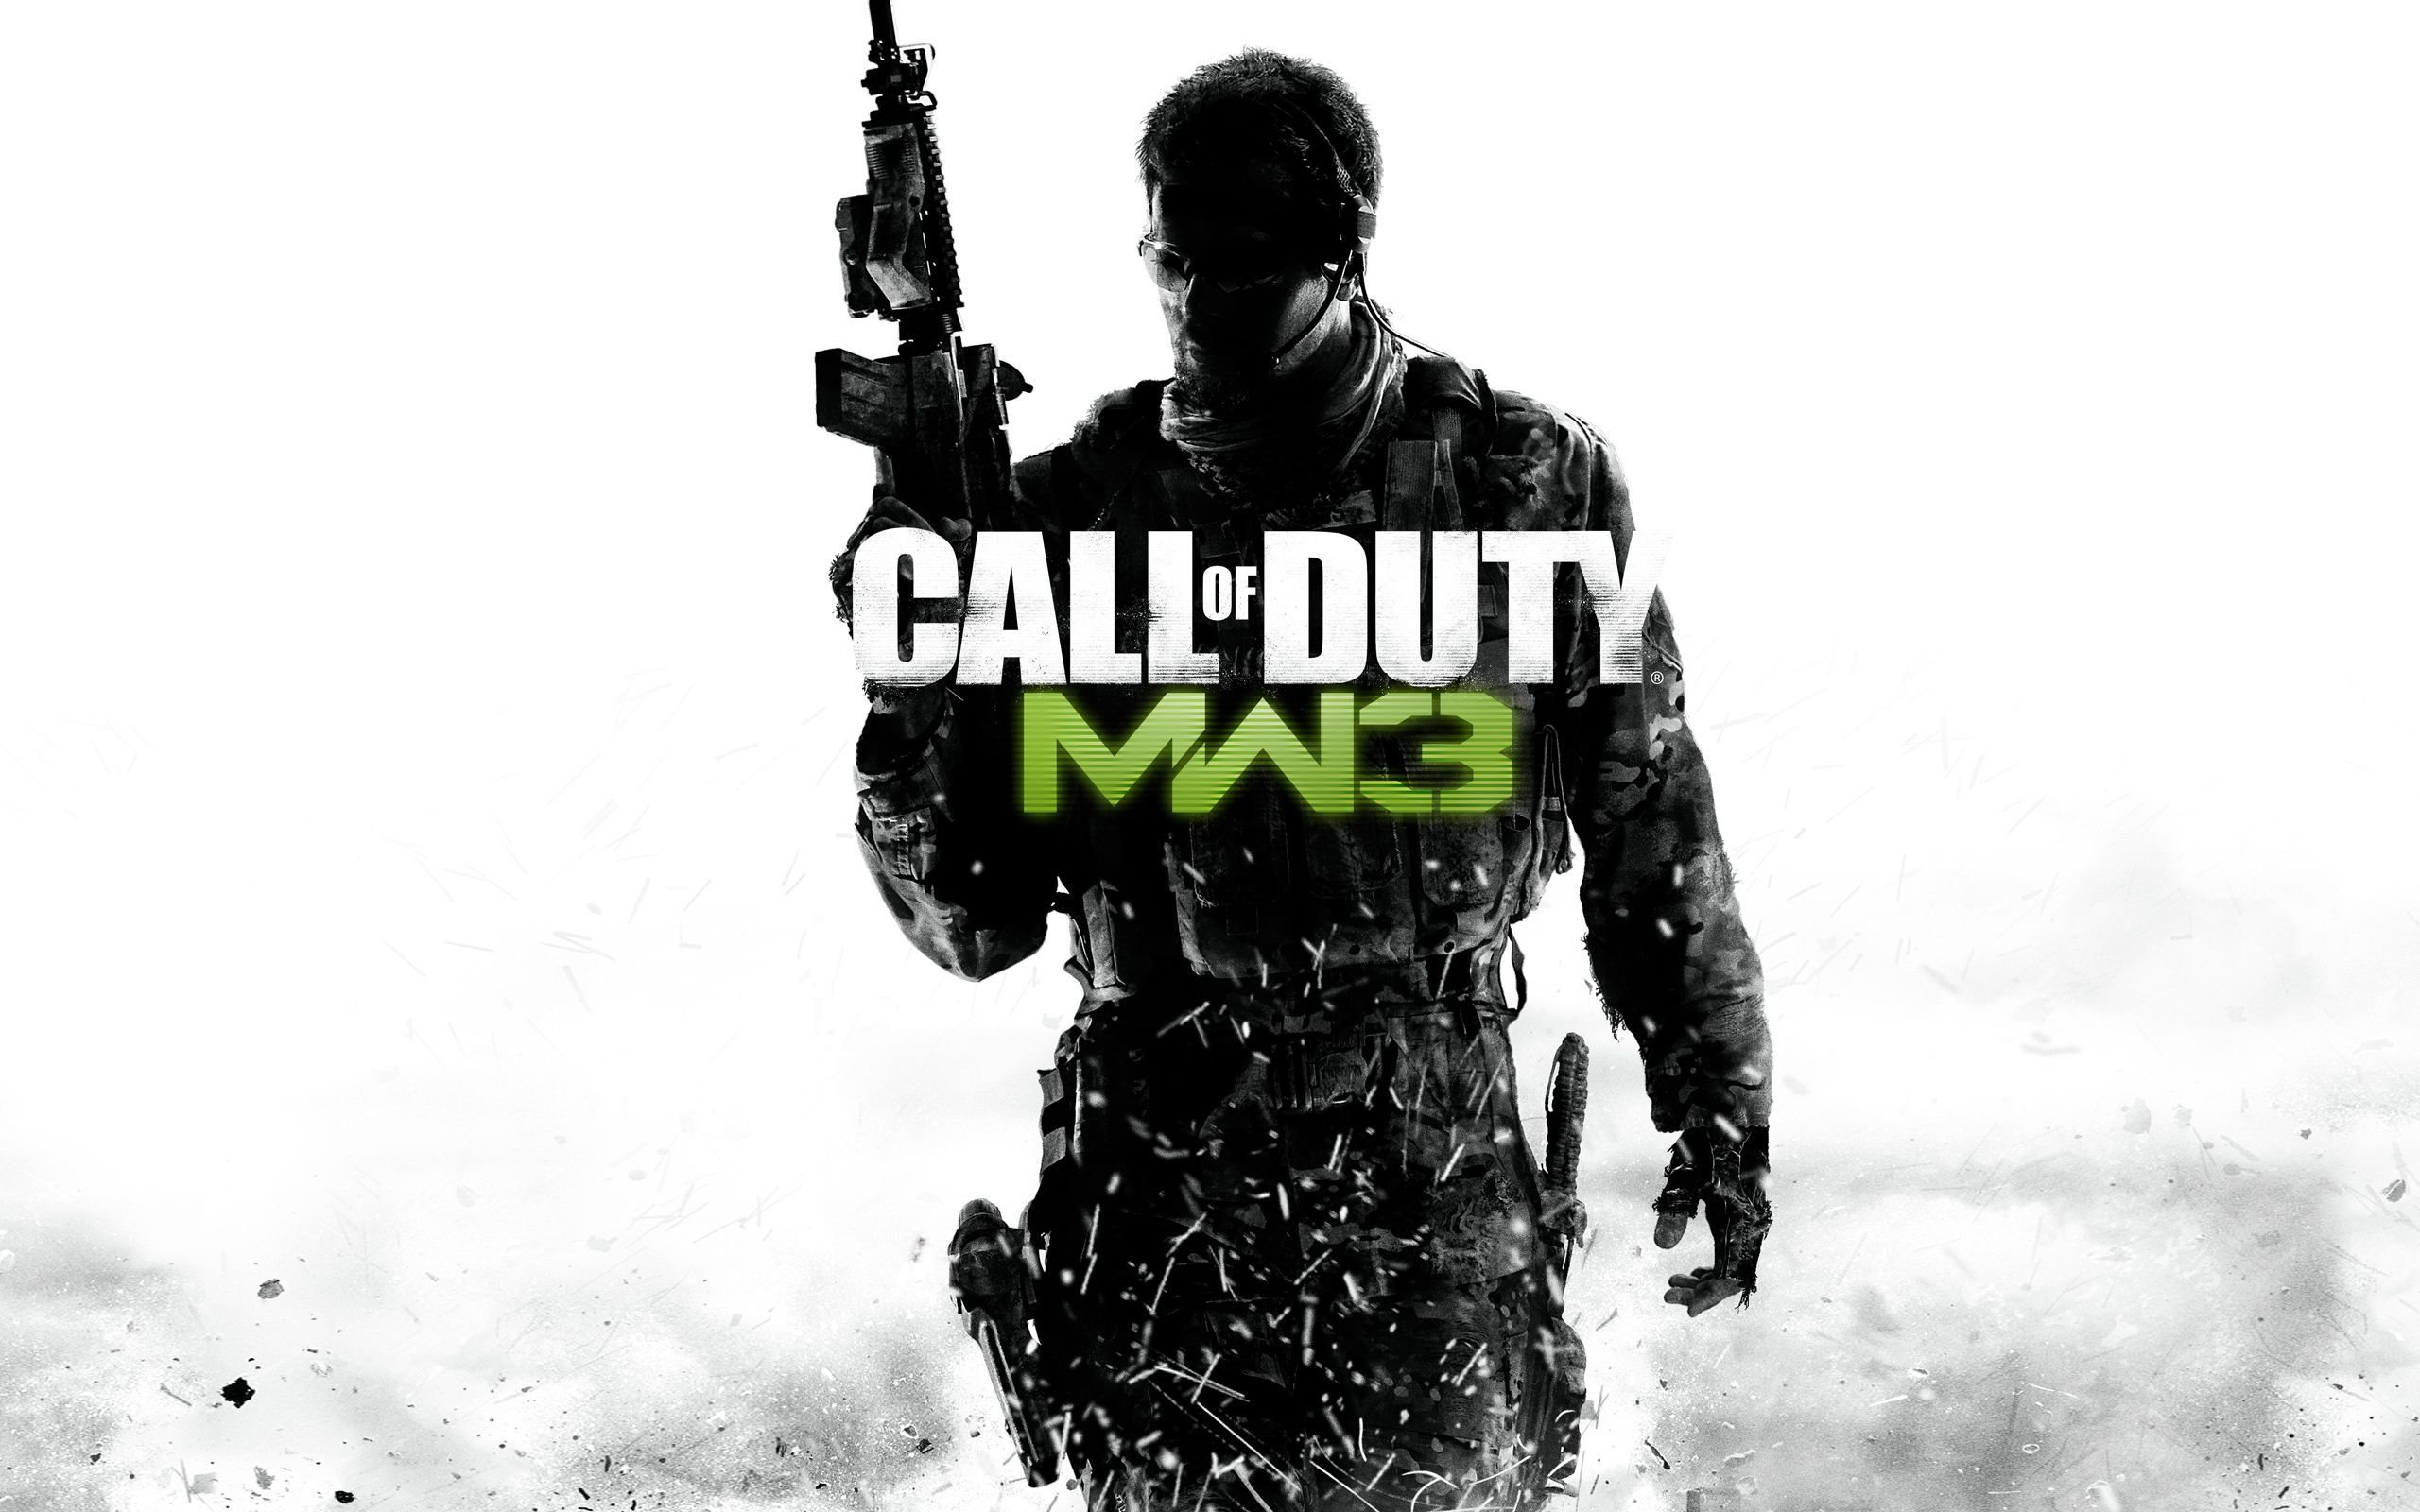 mw3 wallpaper,album cover,movie,font,soldier,photography